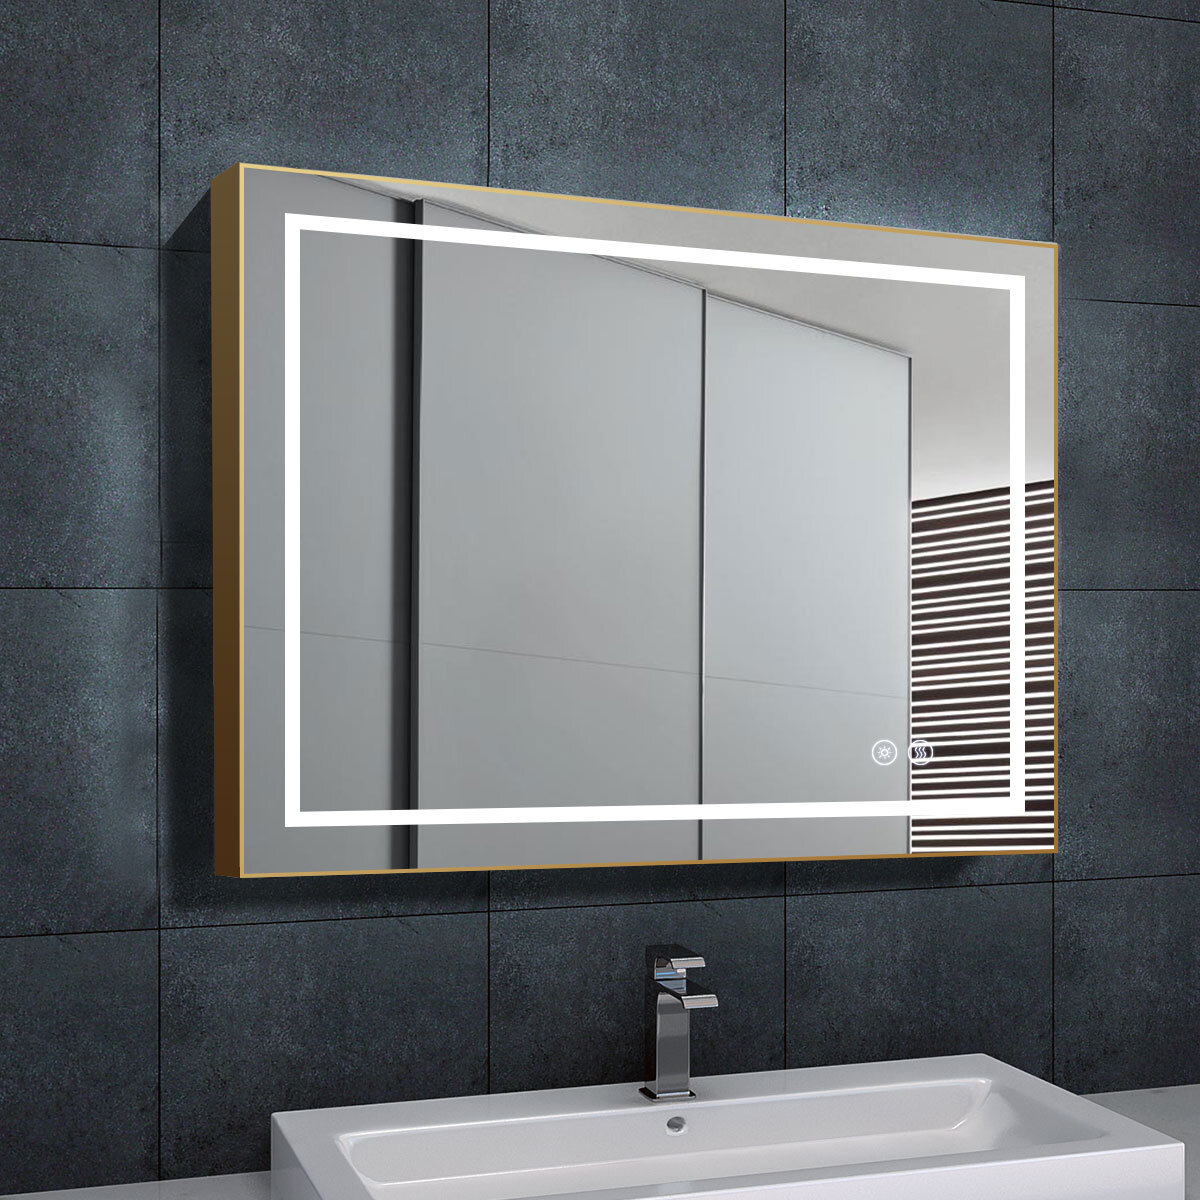 Ivy Bronx 36 X 28 Inch LED Bathroom Mirror With Touch Button, Black Frame,  Anti Fog, Dimmable, Vertical / Horizontal Mount 